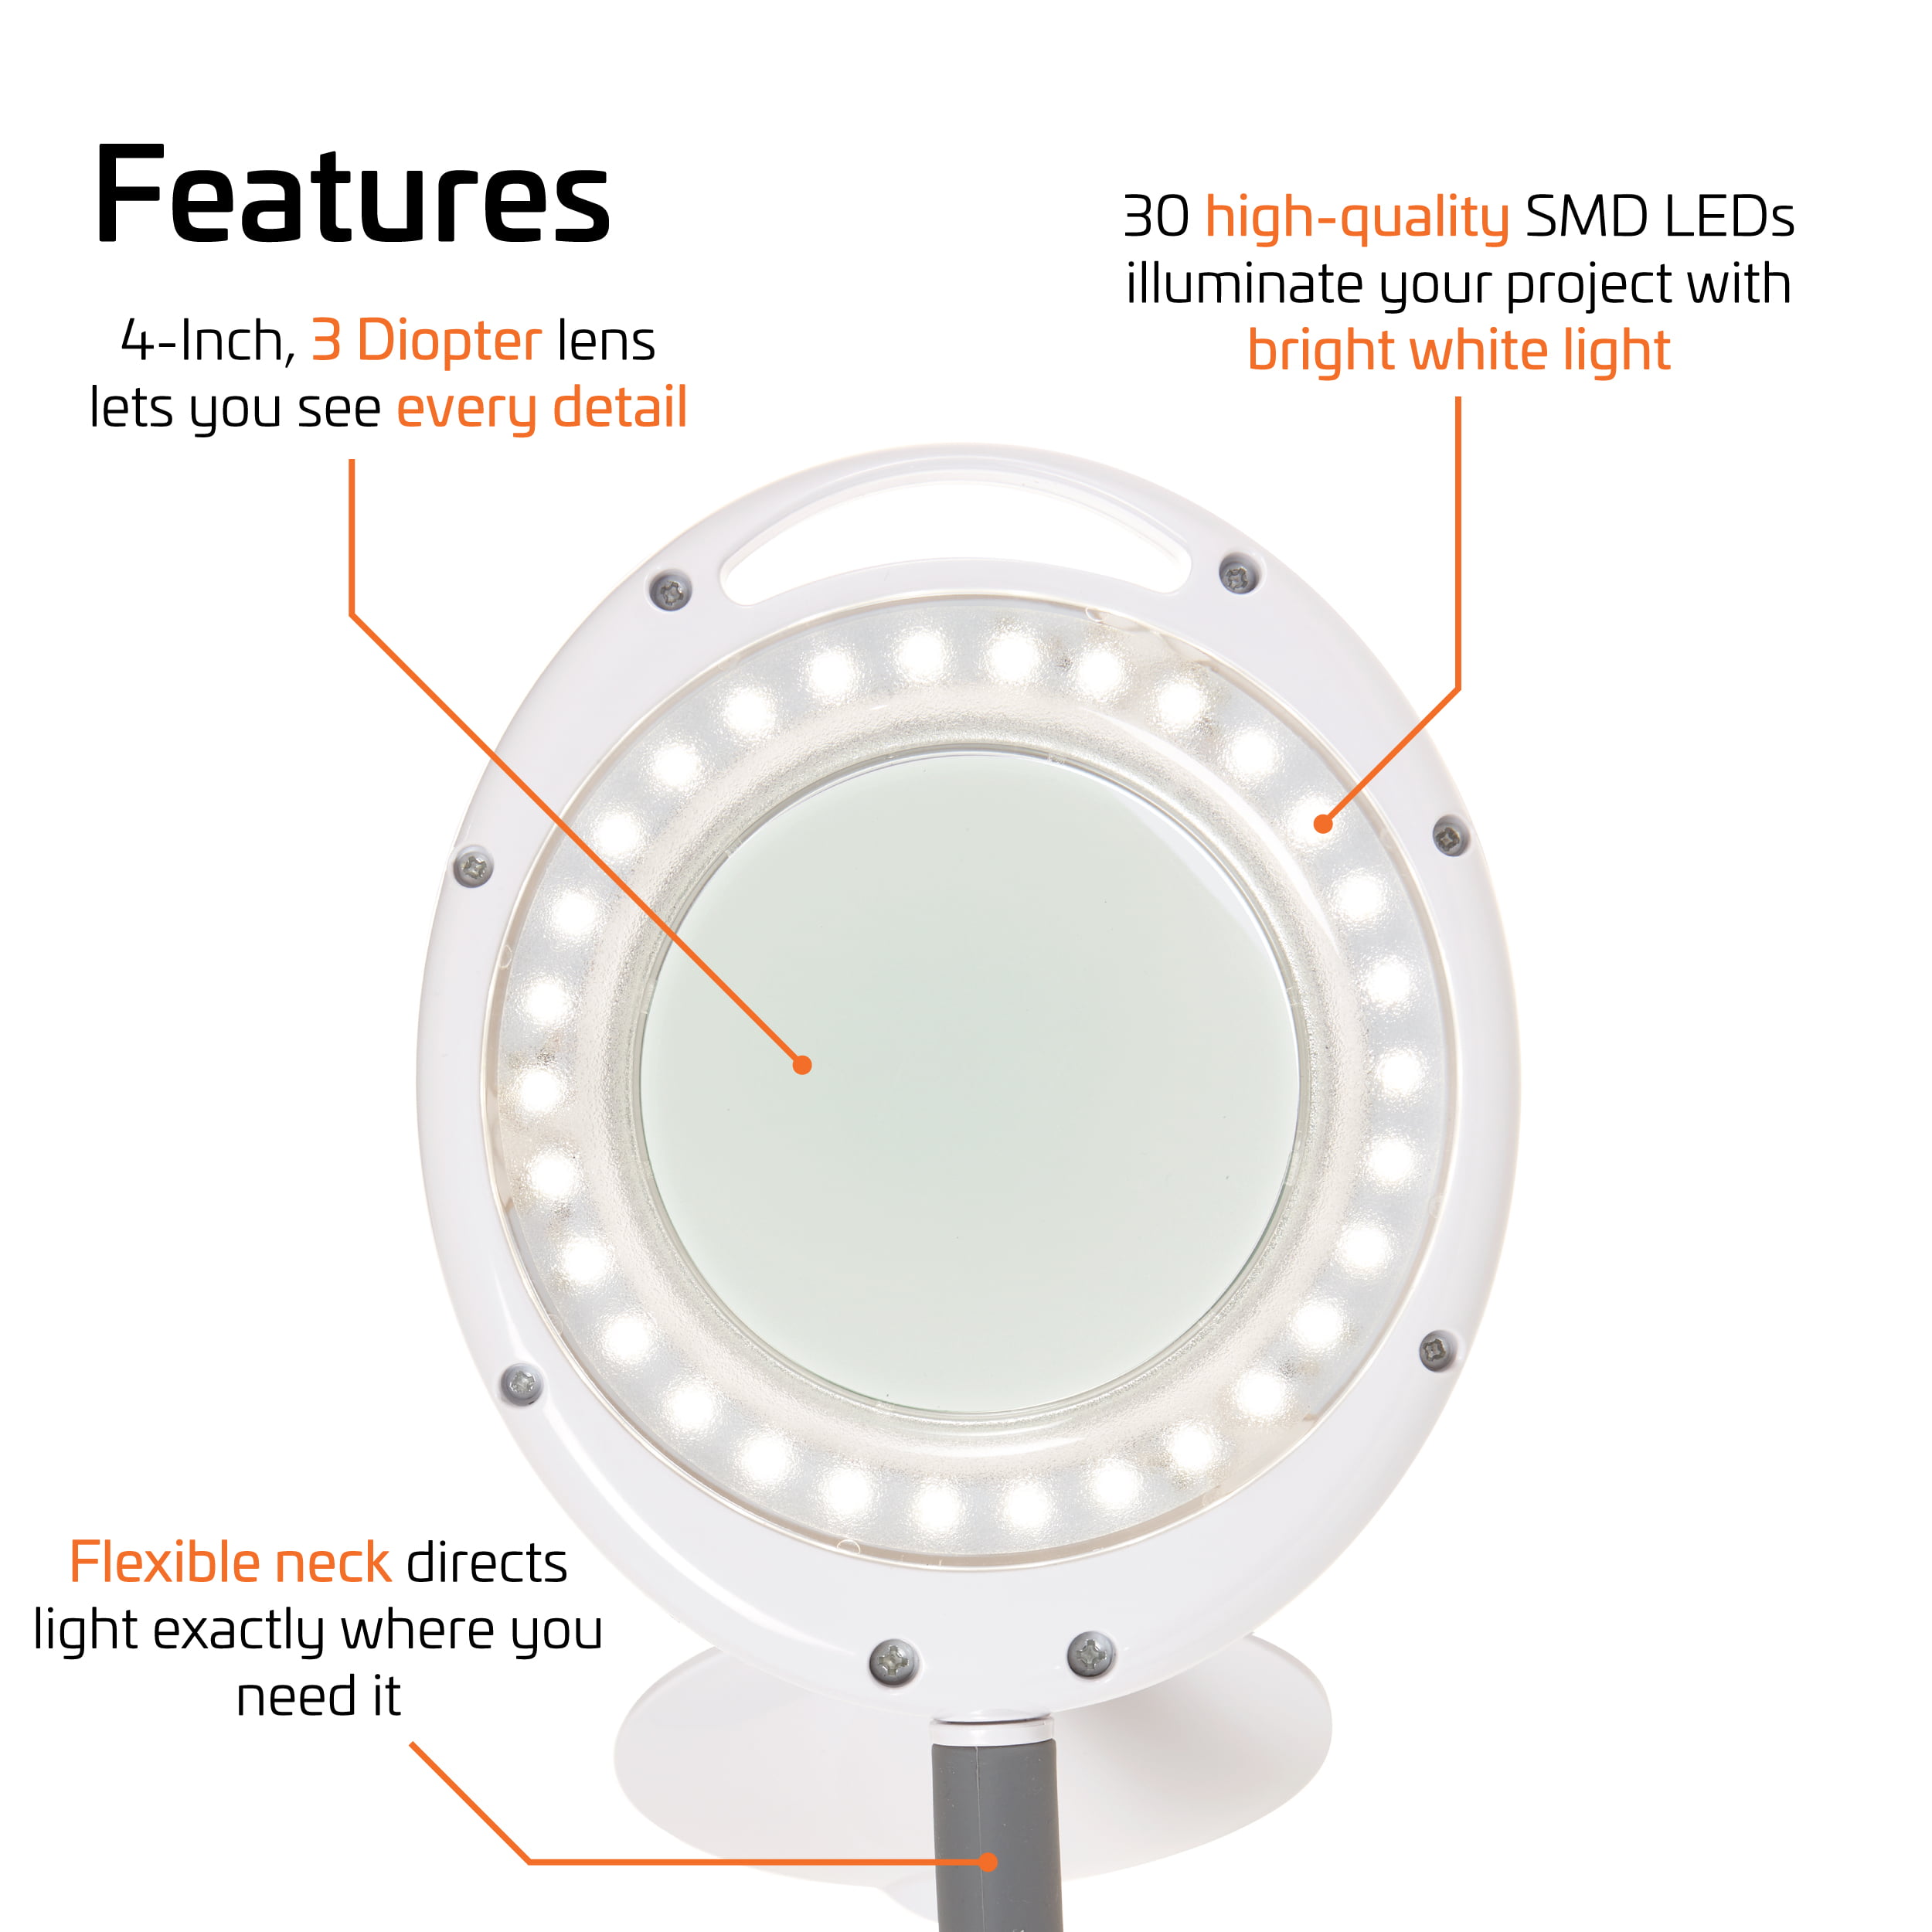 5X Magnifying Glass Lamp with Metal Clamp 2.76 Inch Lens 24 LED Lights 3 Color Modes Magnifier for Circuit Boards Reading Repairing Artwork Crafts Sewing